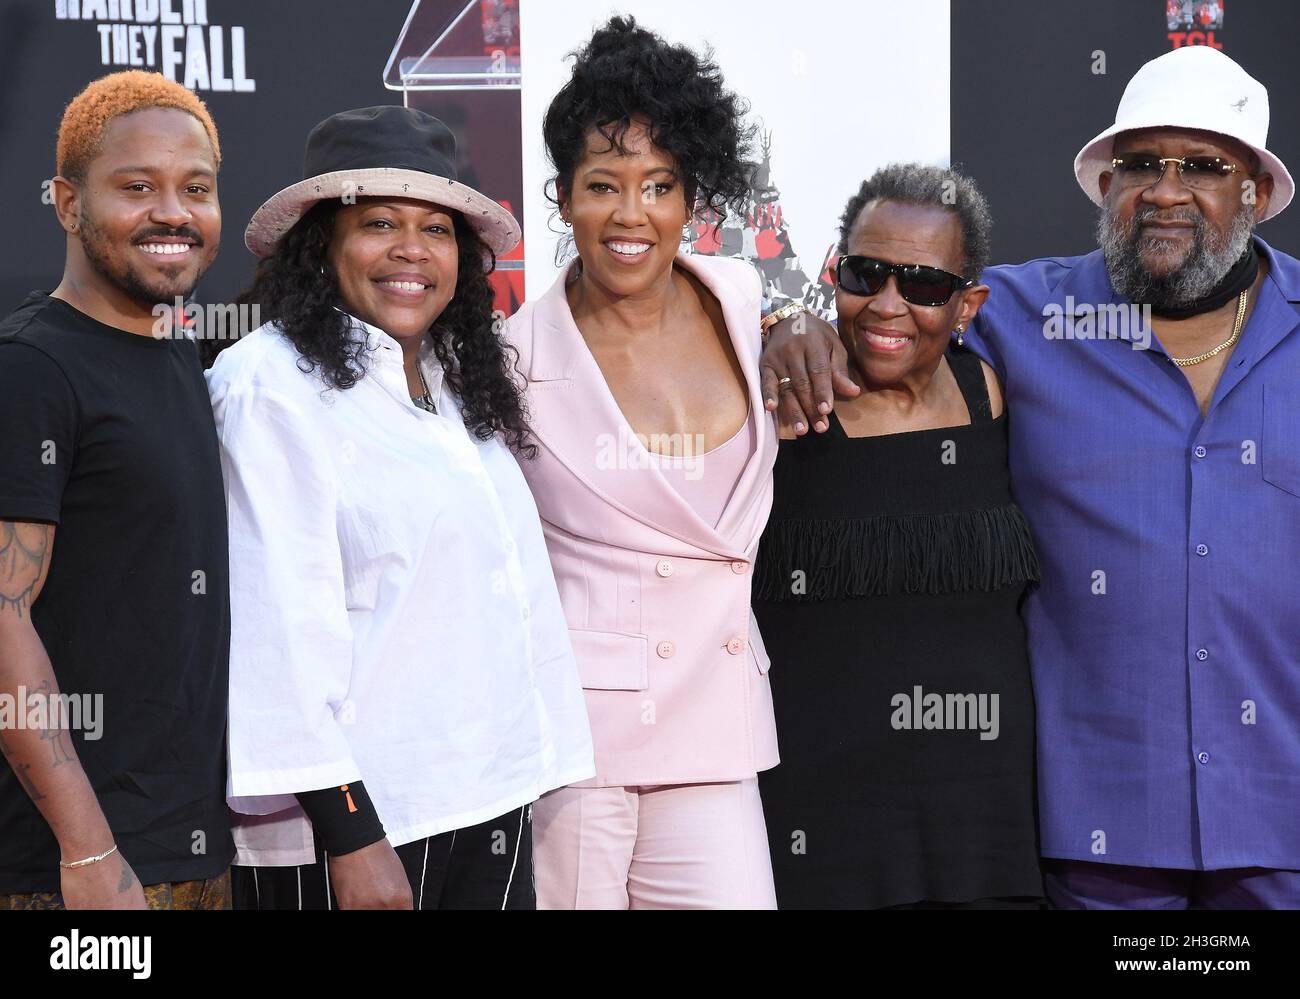 Regina king and reina king hires stock photography and images Alamy